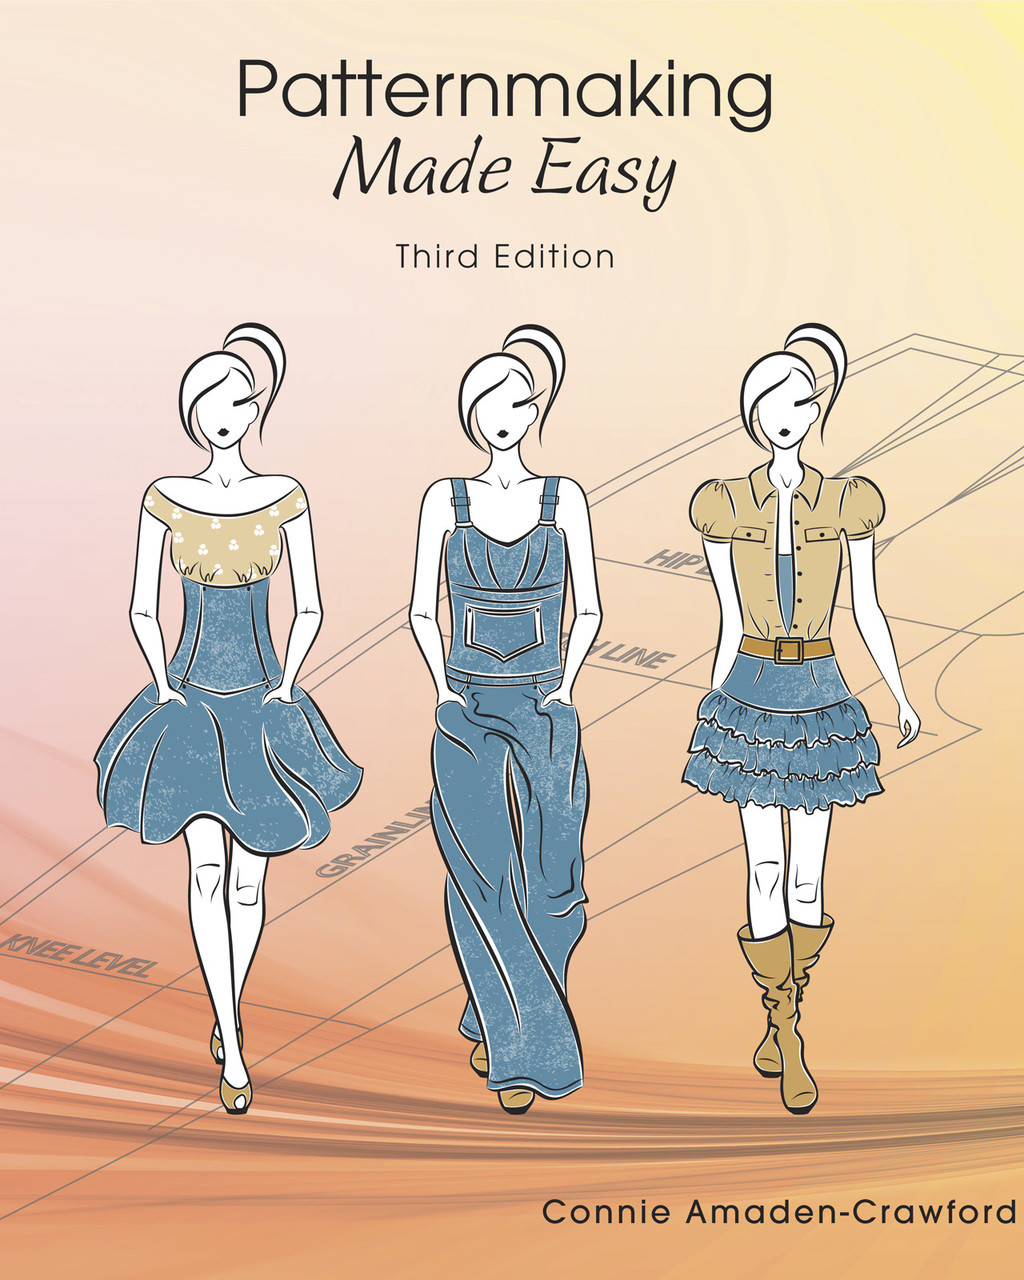 Pattern-making for Fashion Design Textbook - Third Edition(s)